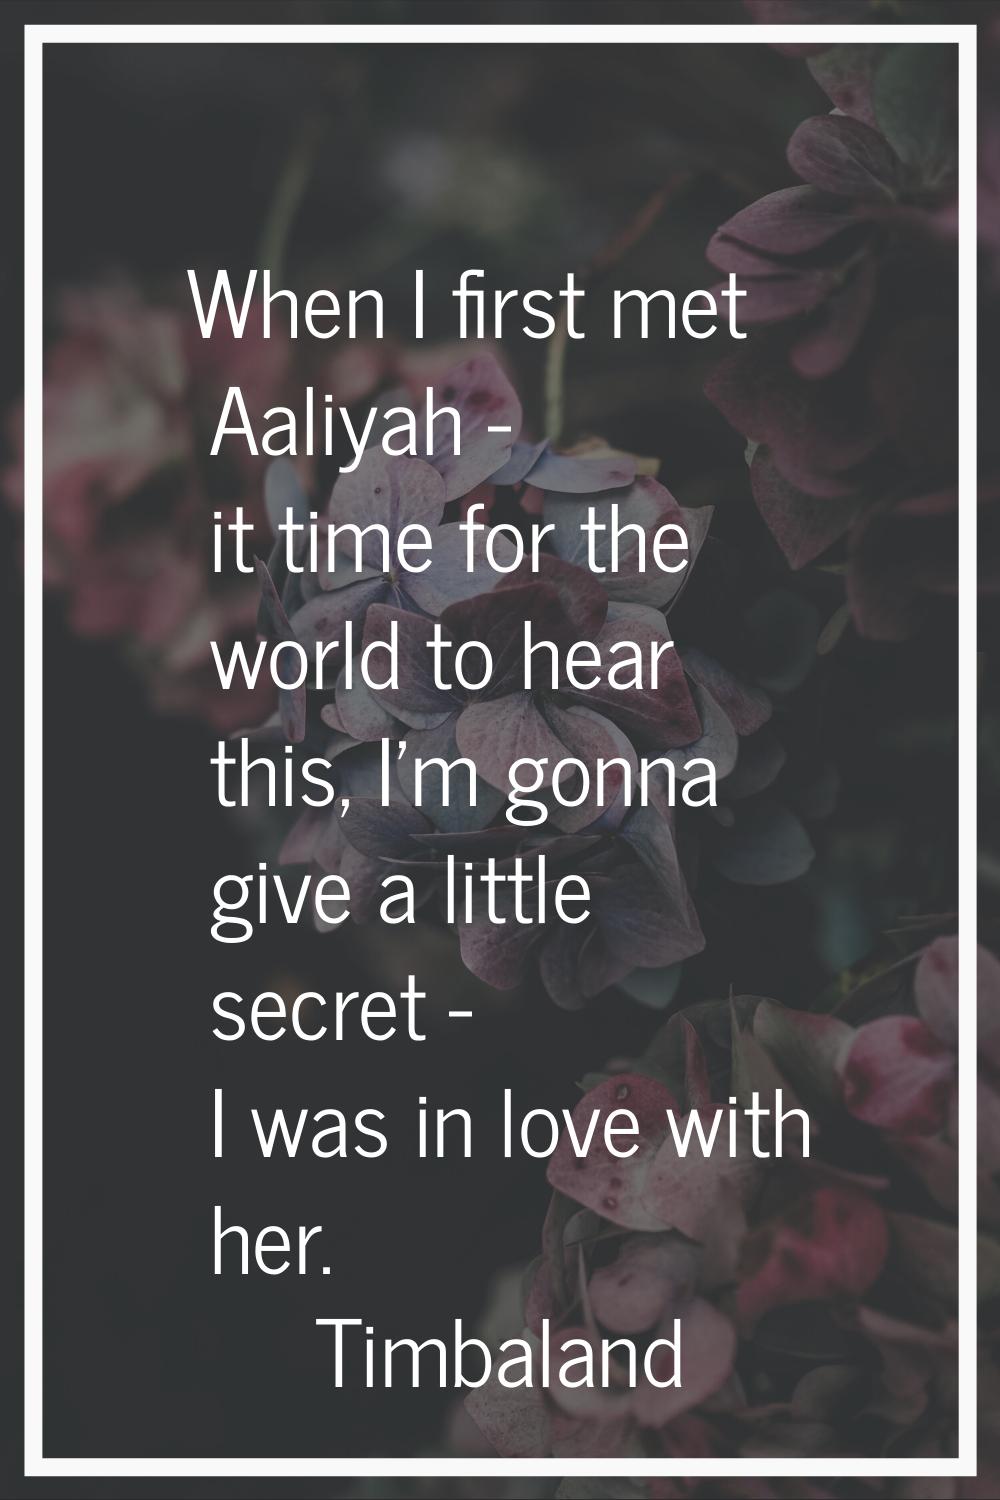 When I first met Aaliyah - it time for the world to hear this, I'm gonna give a little secret - I w